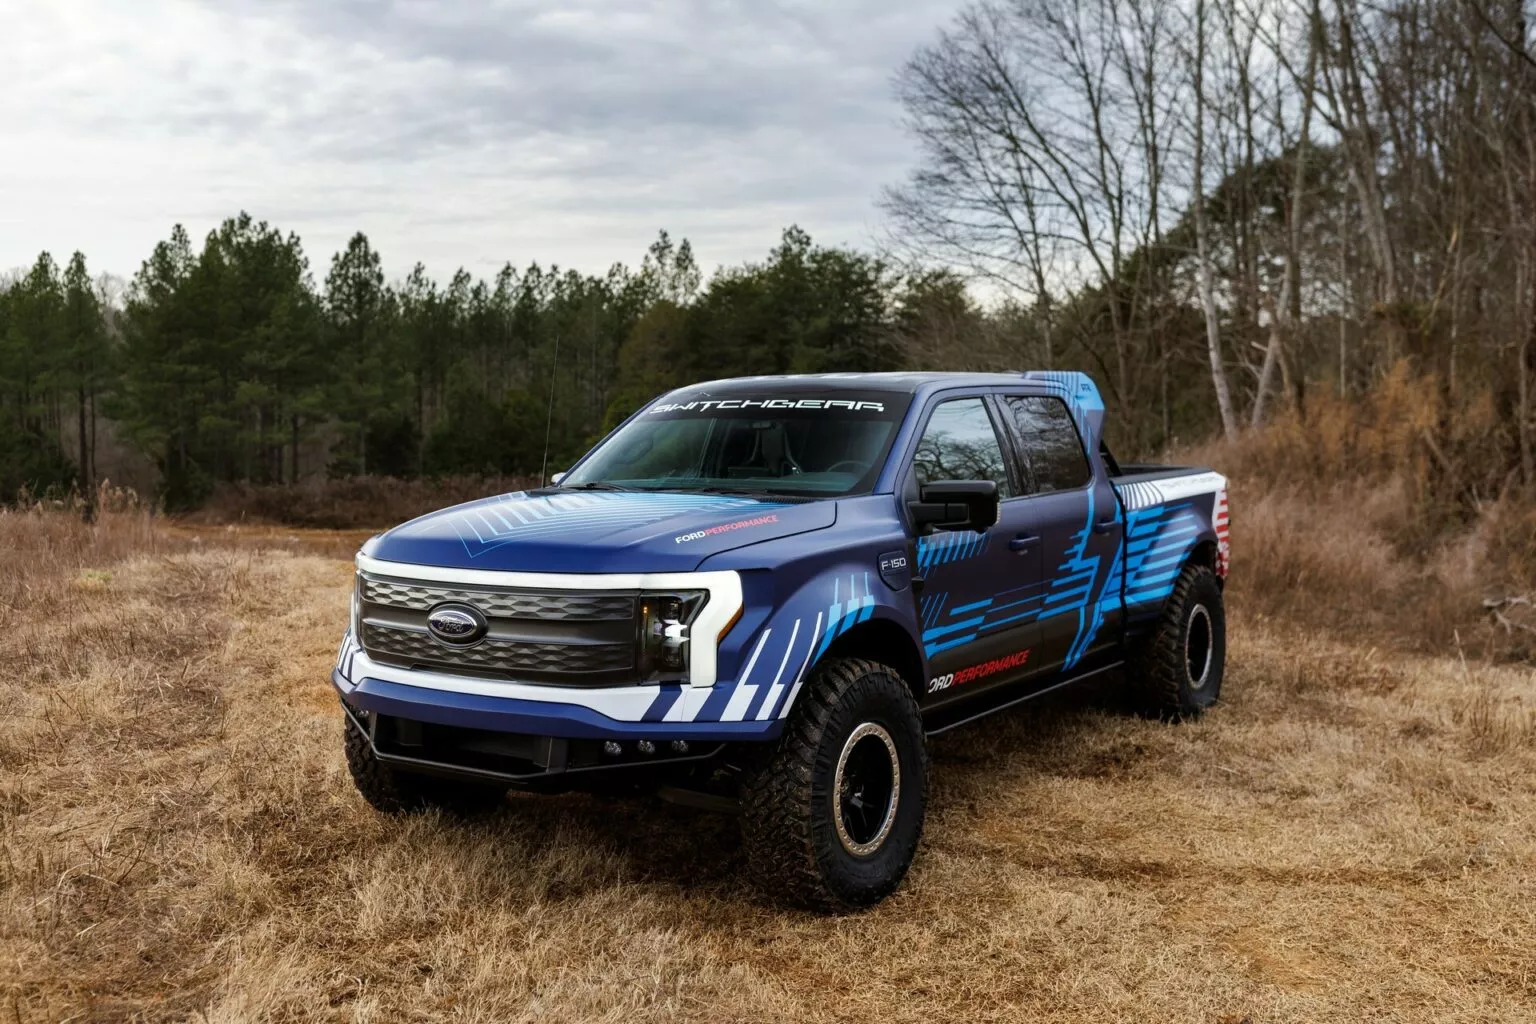 Ford F 150 Lightning Switchgear Concept 1 - Ford Announces Reduction in F-150 Lightning Production Amid Lower-Than-Expected Demand for EVs